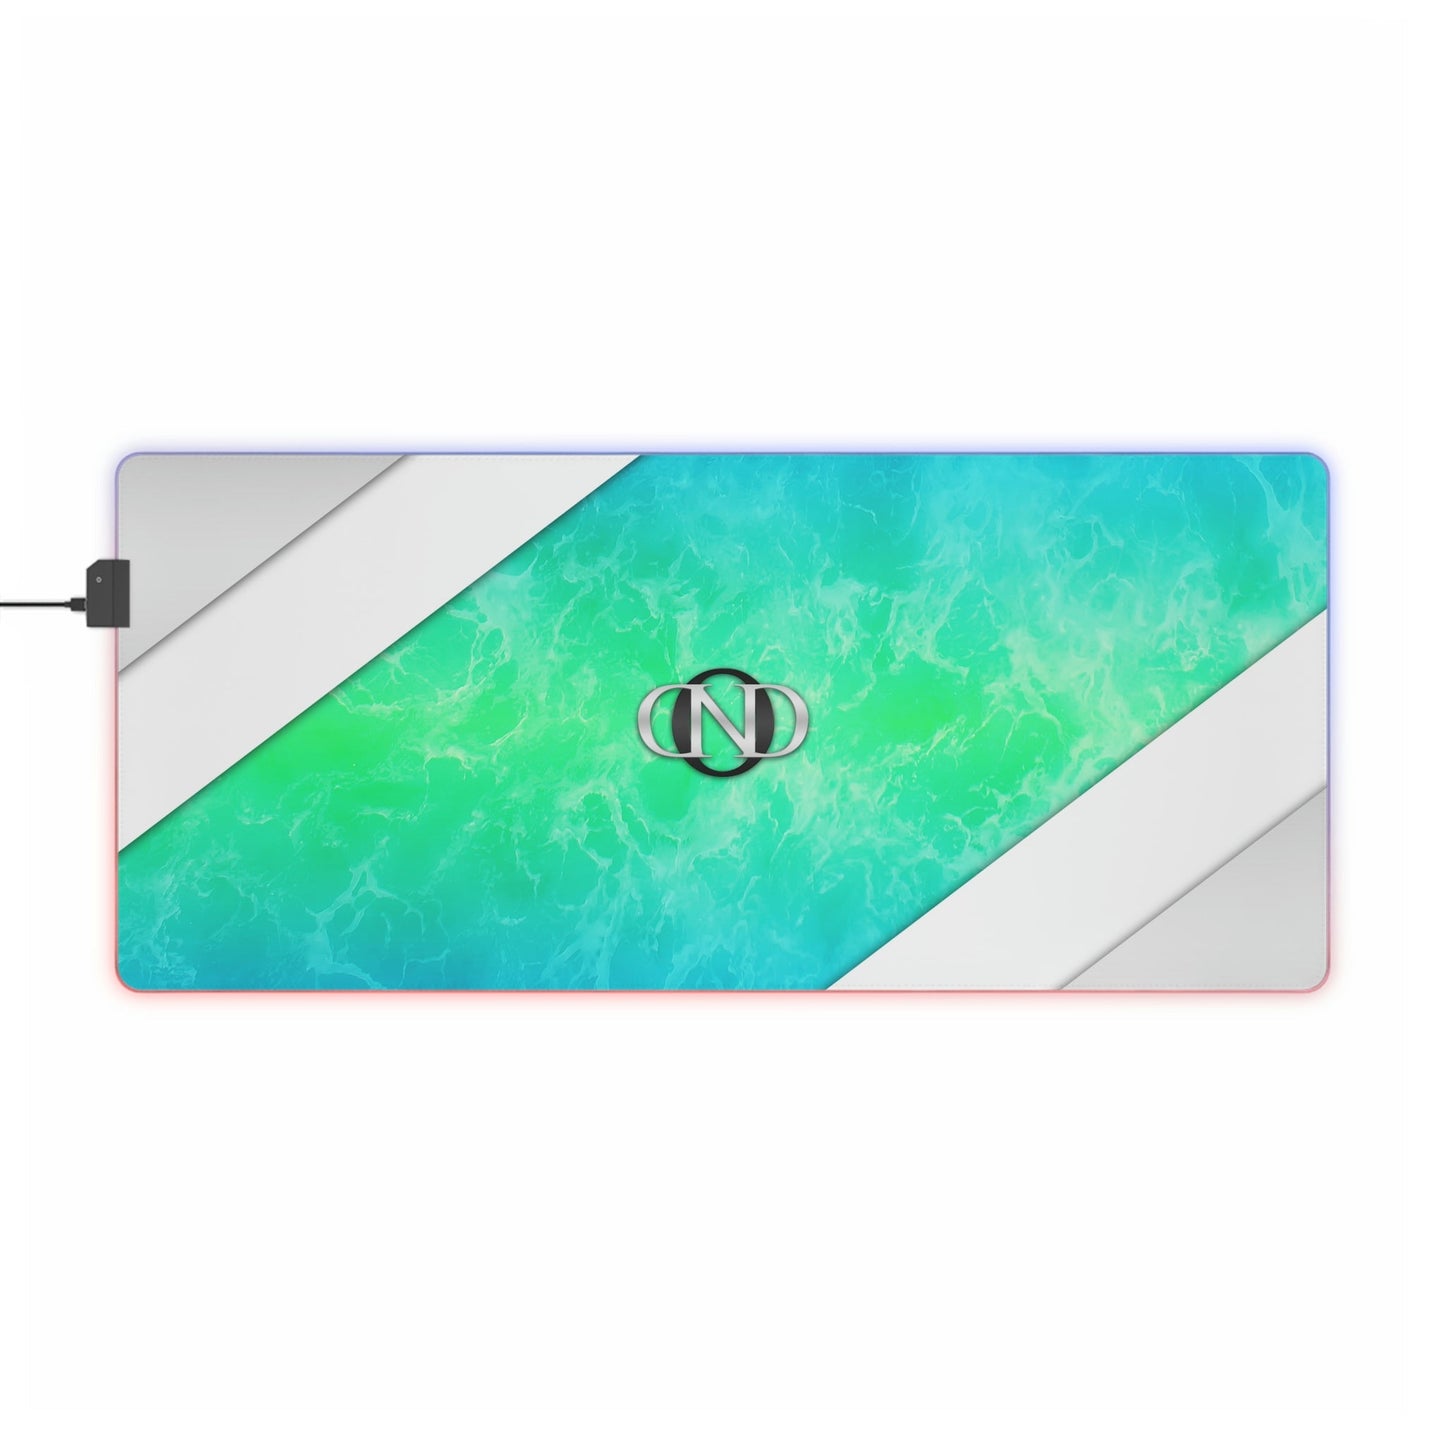 2 Neduz Beach Water LED Gaming Mouse Pad with Clean Steel